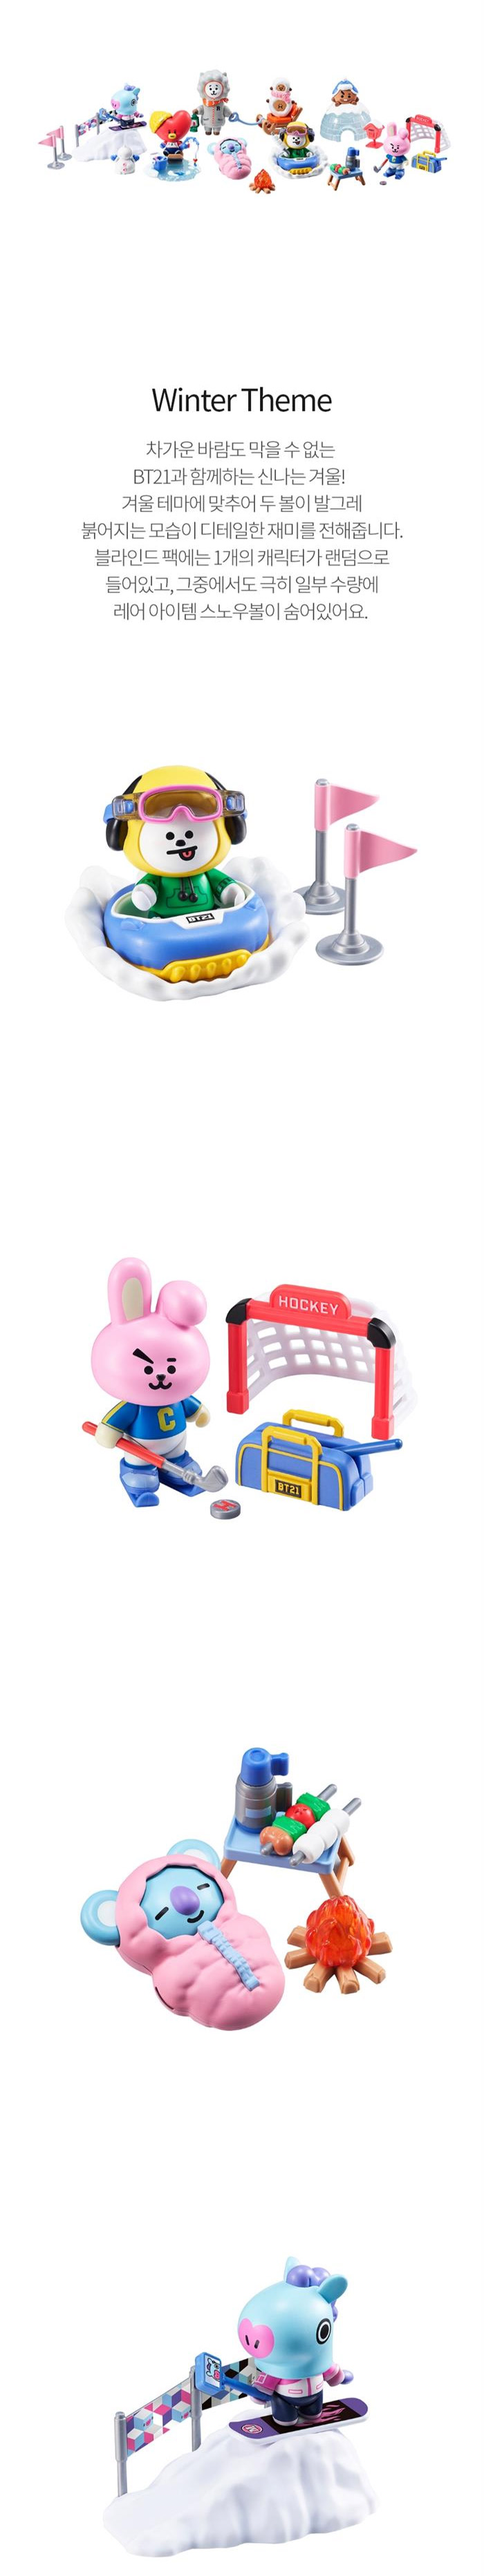 bt21 collectible figure